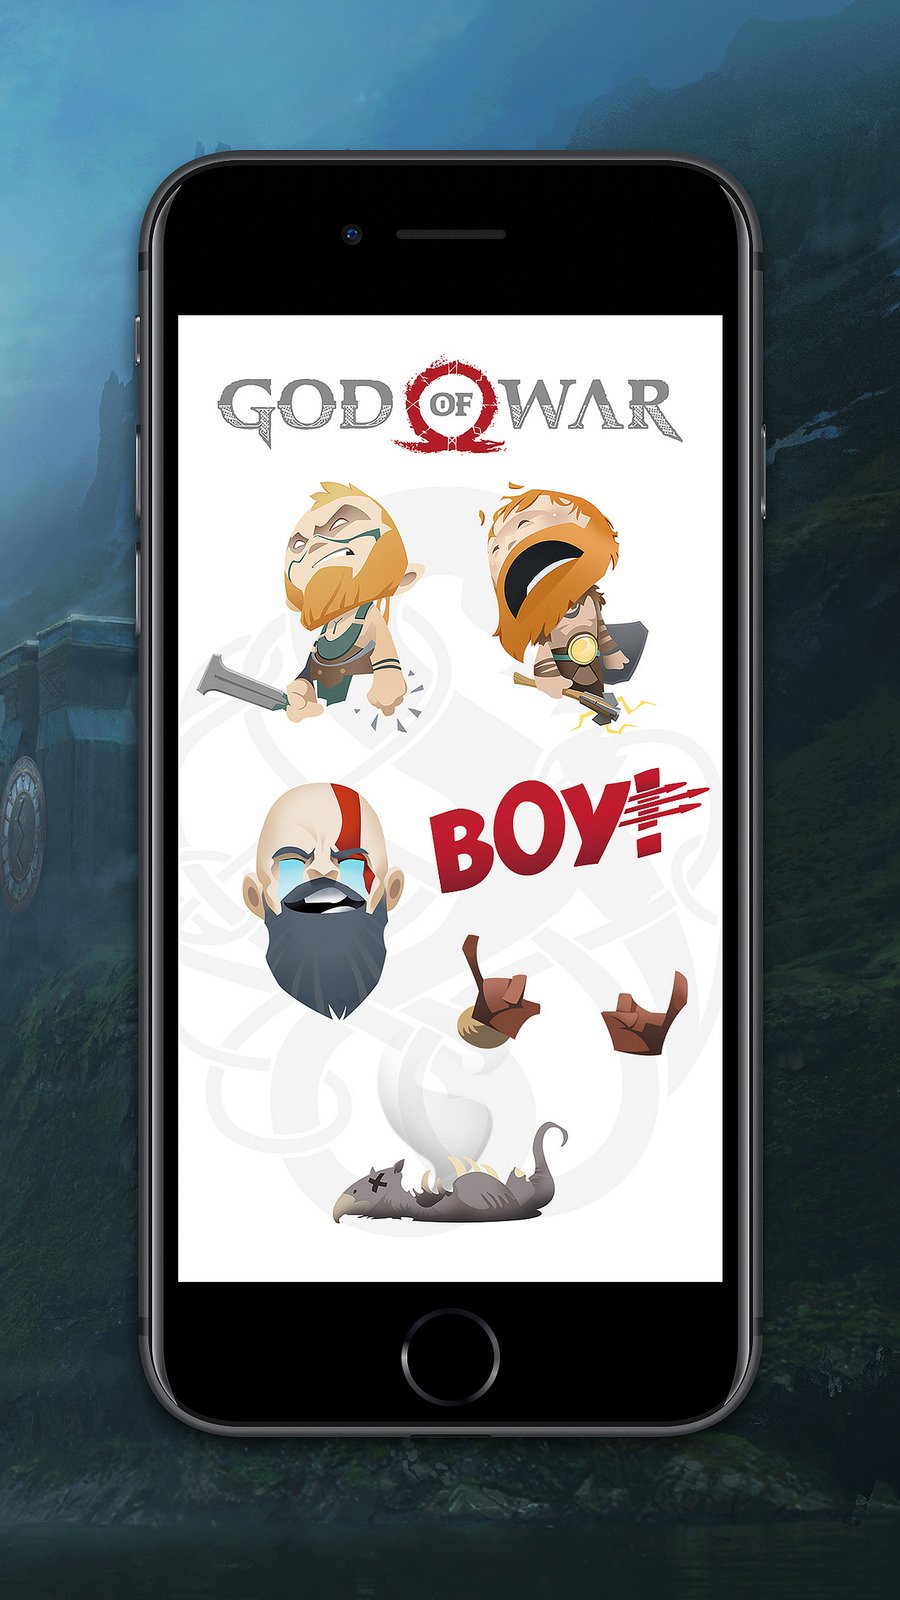 God-of-War-stickers-mobiles-03-09-05-2018